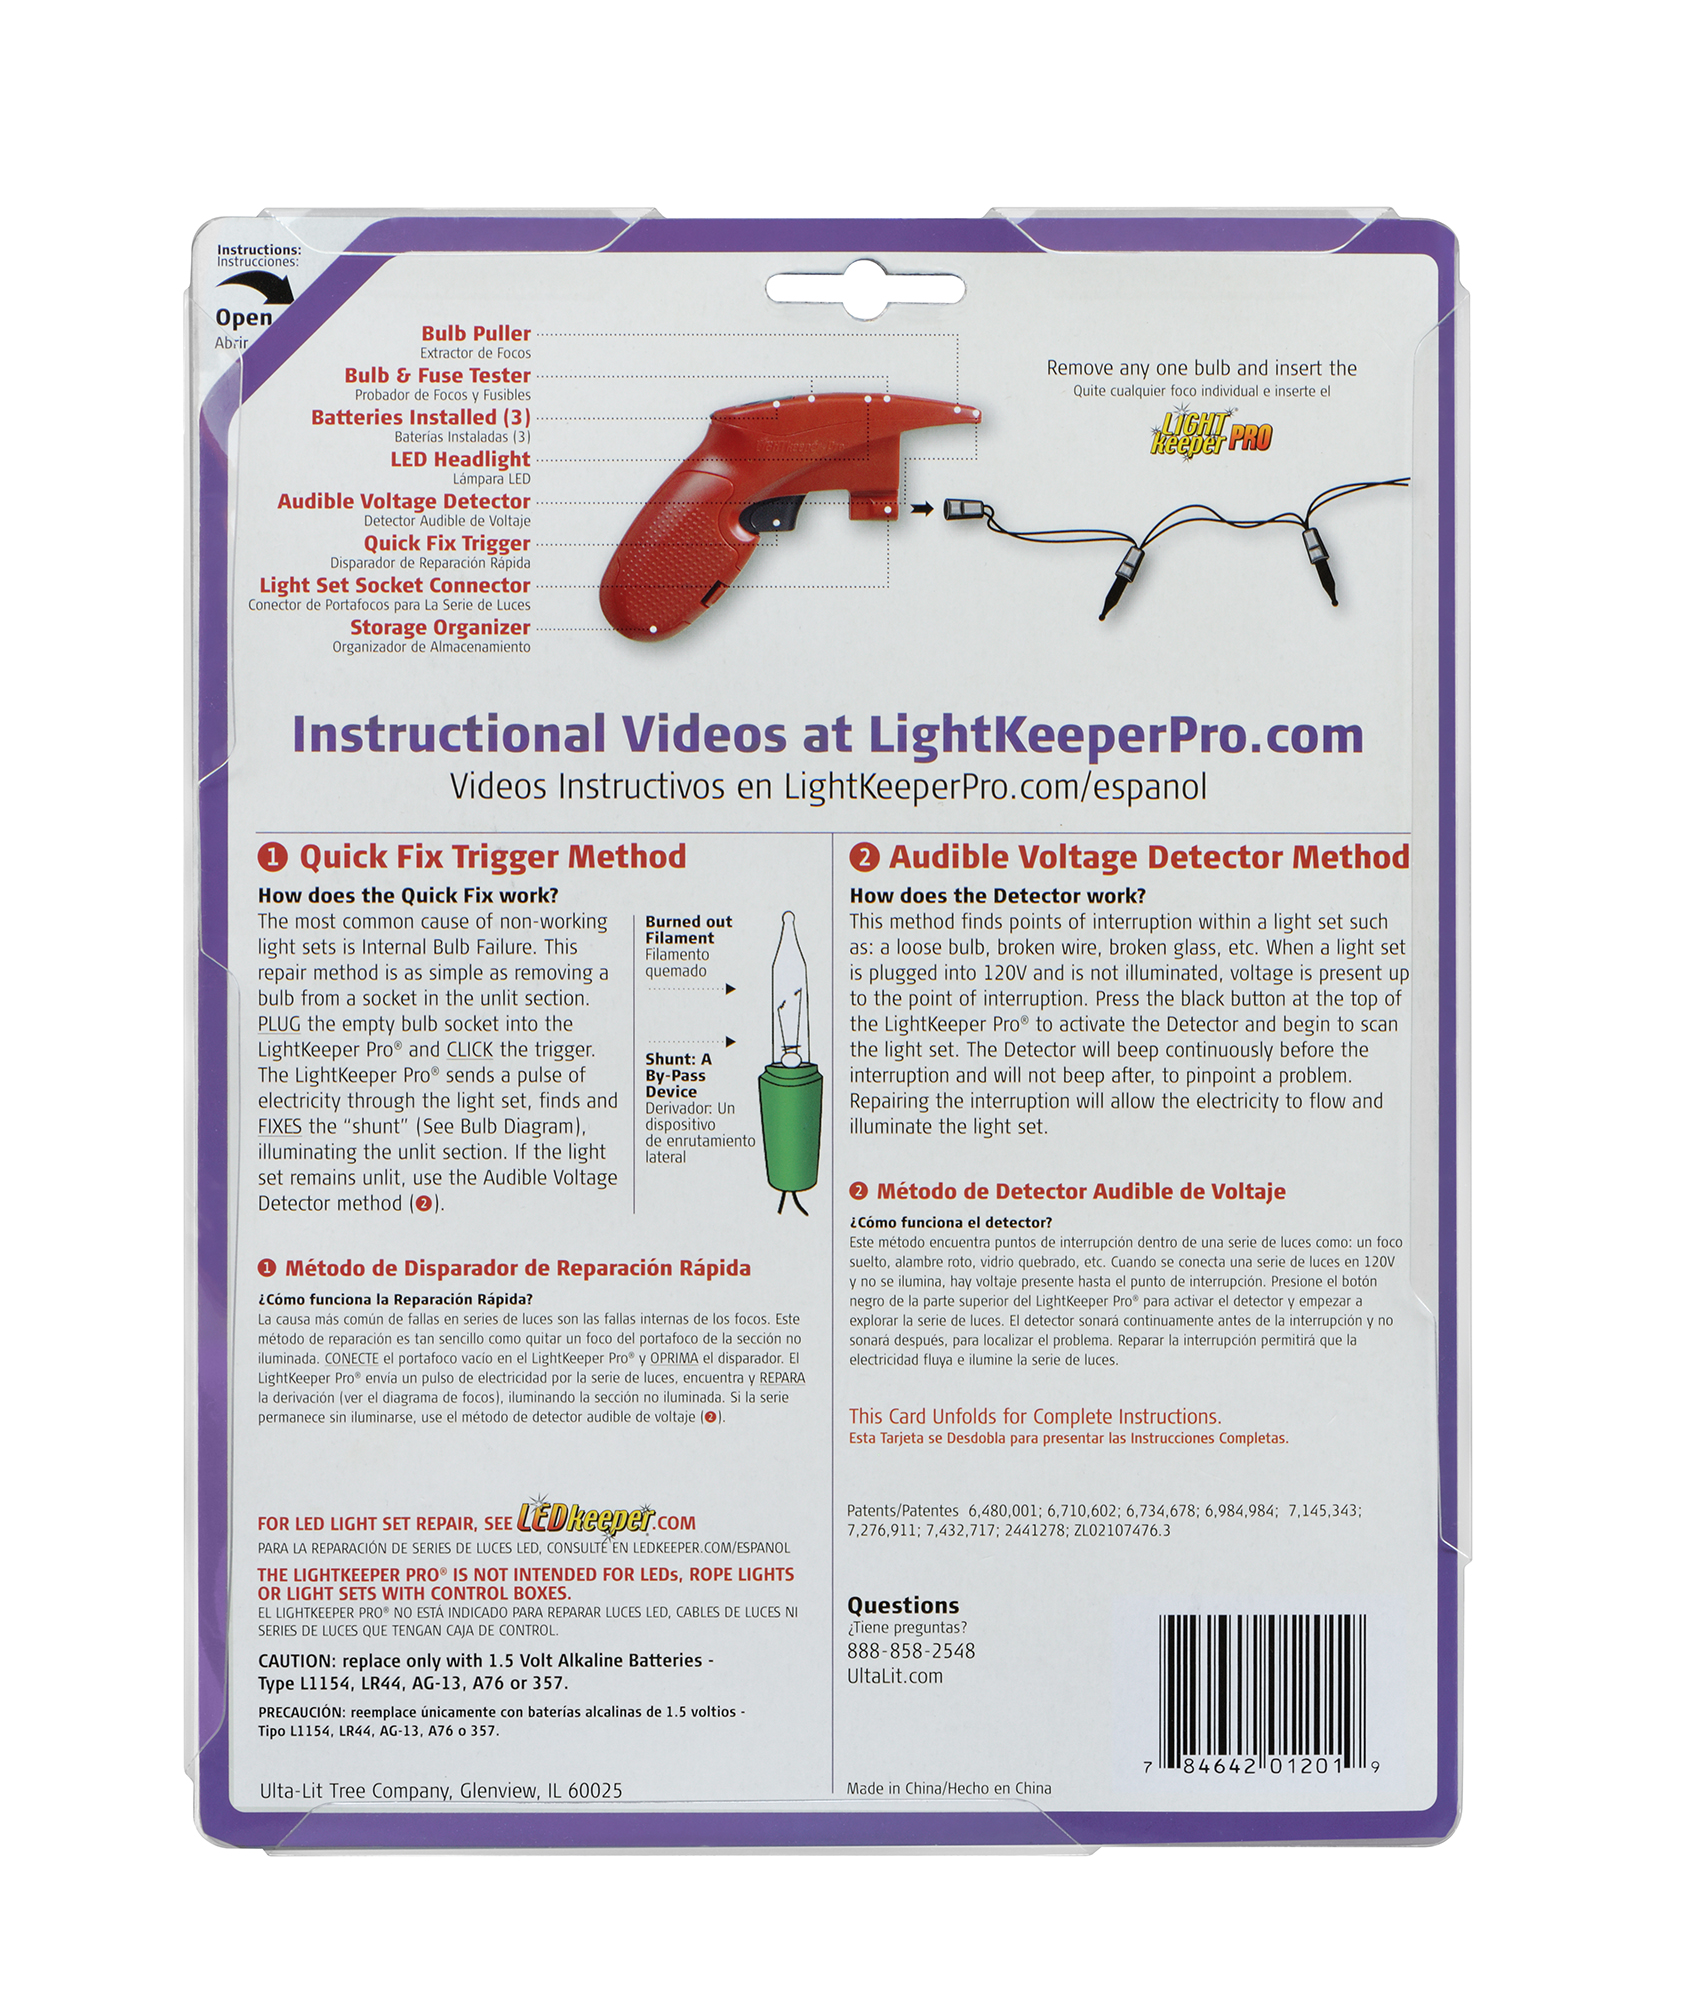 LightKeeper Pro - The Complete Tool for Incandescent Light Set Repair - image 4 of 11